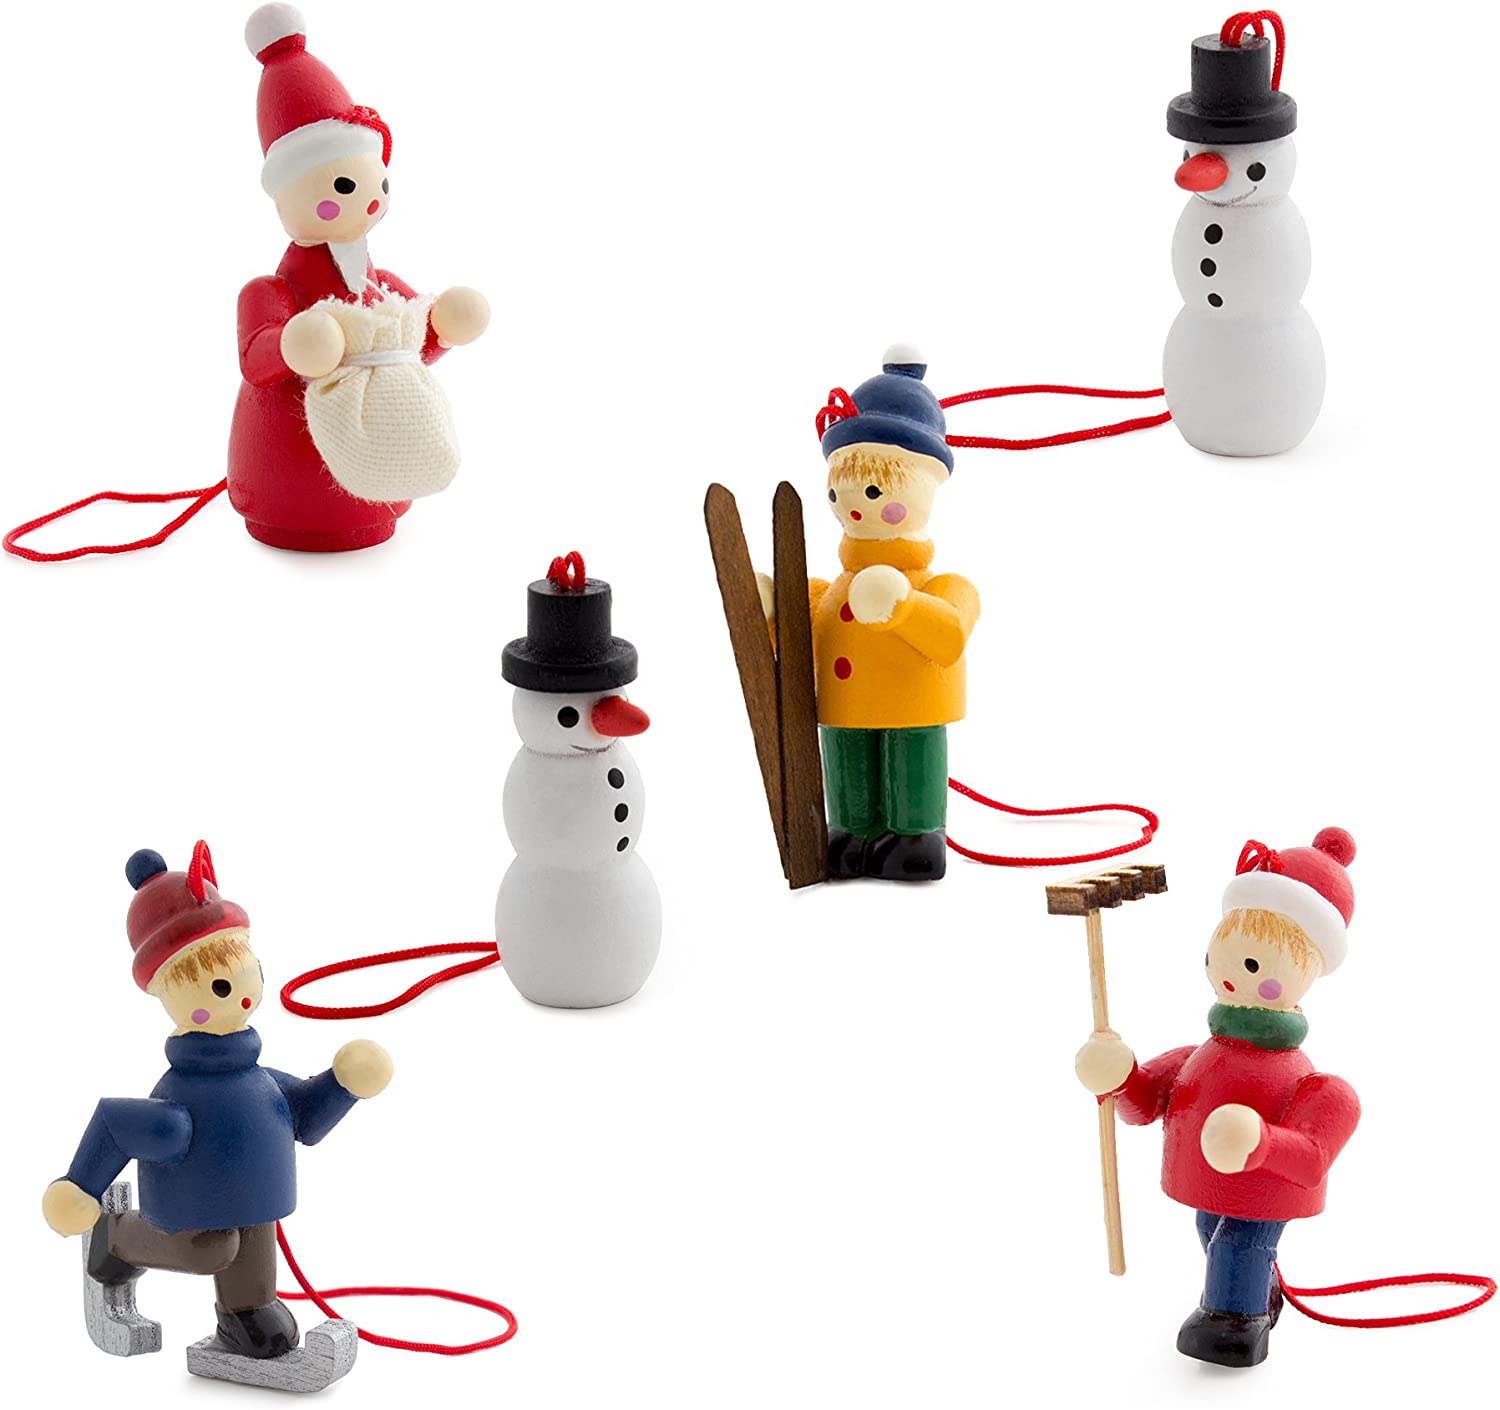 German wooden CHristmas ornaments with children and santas